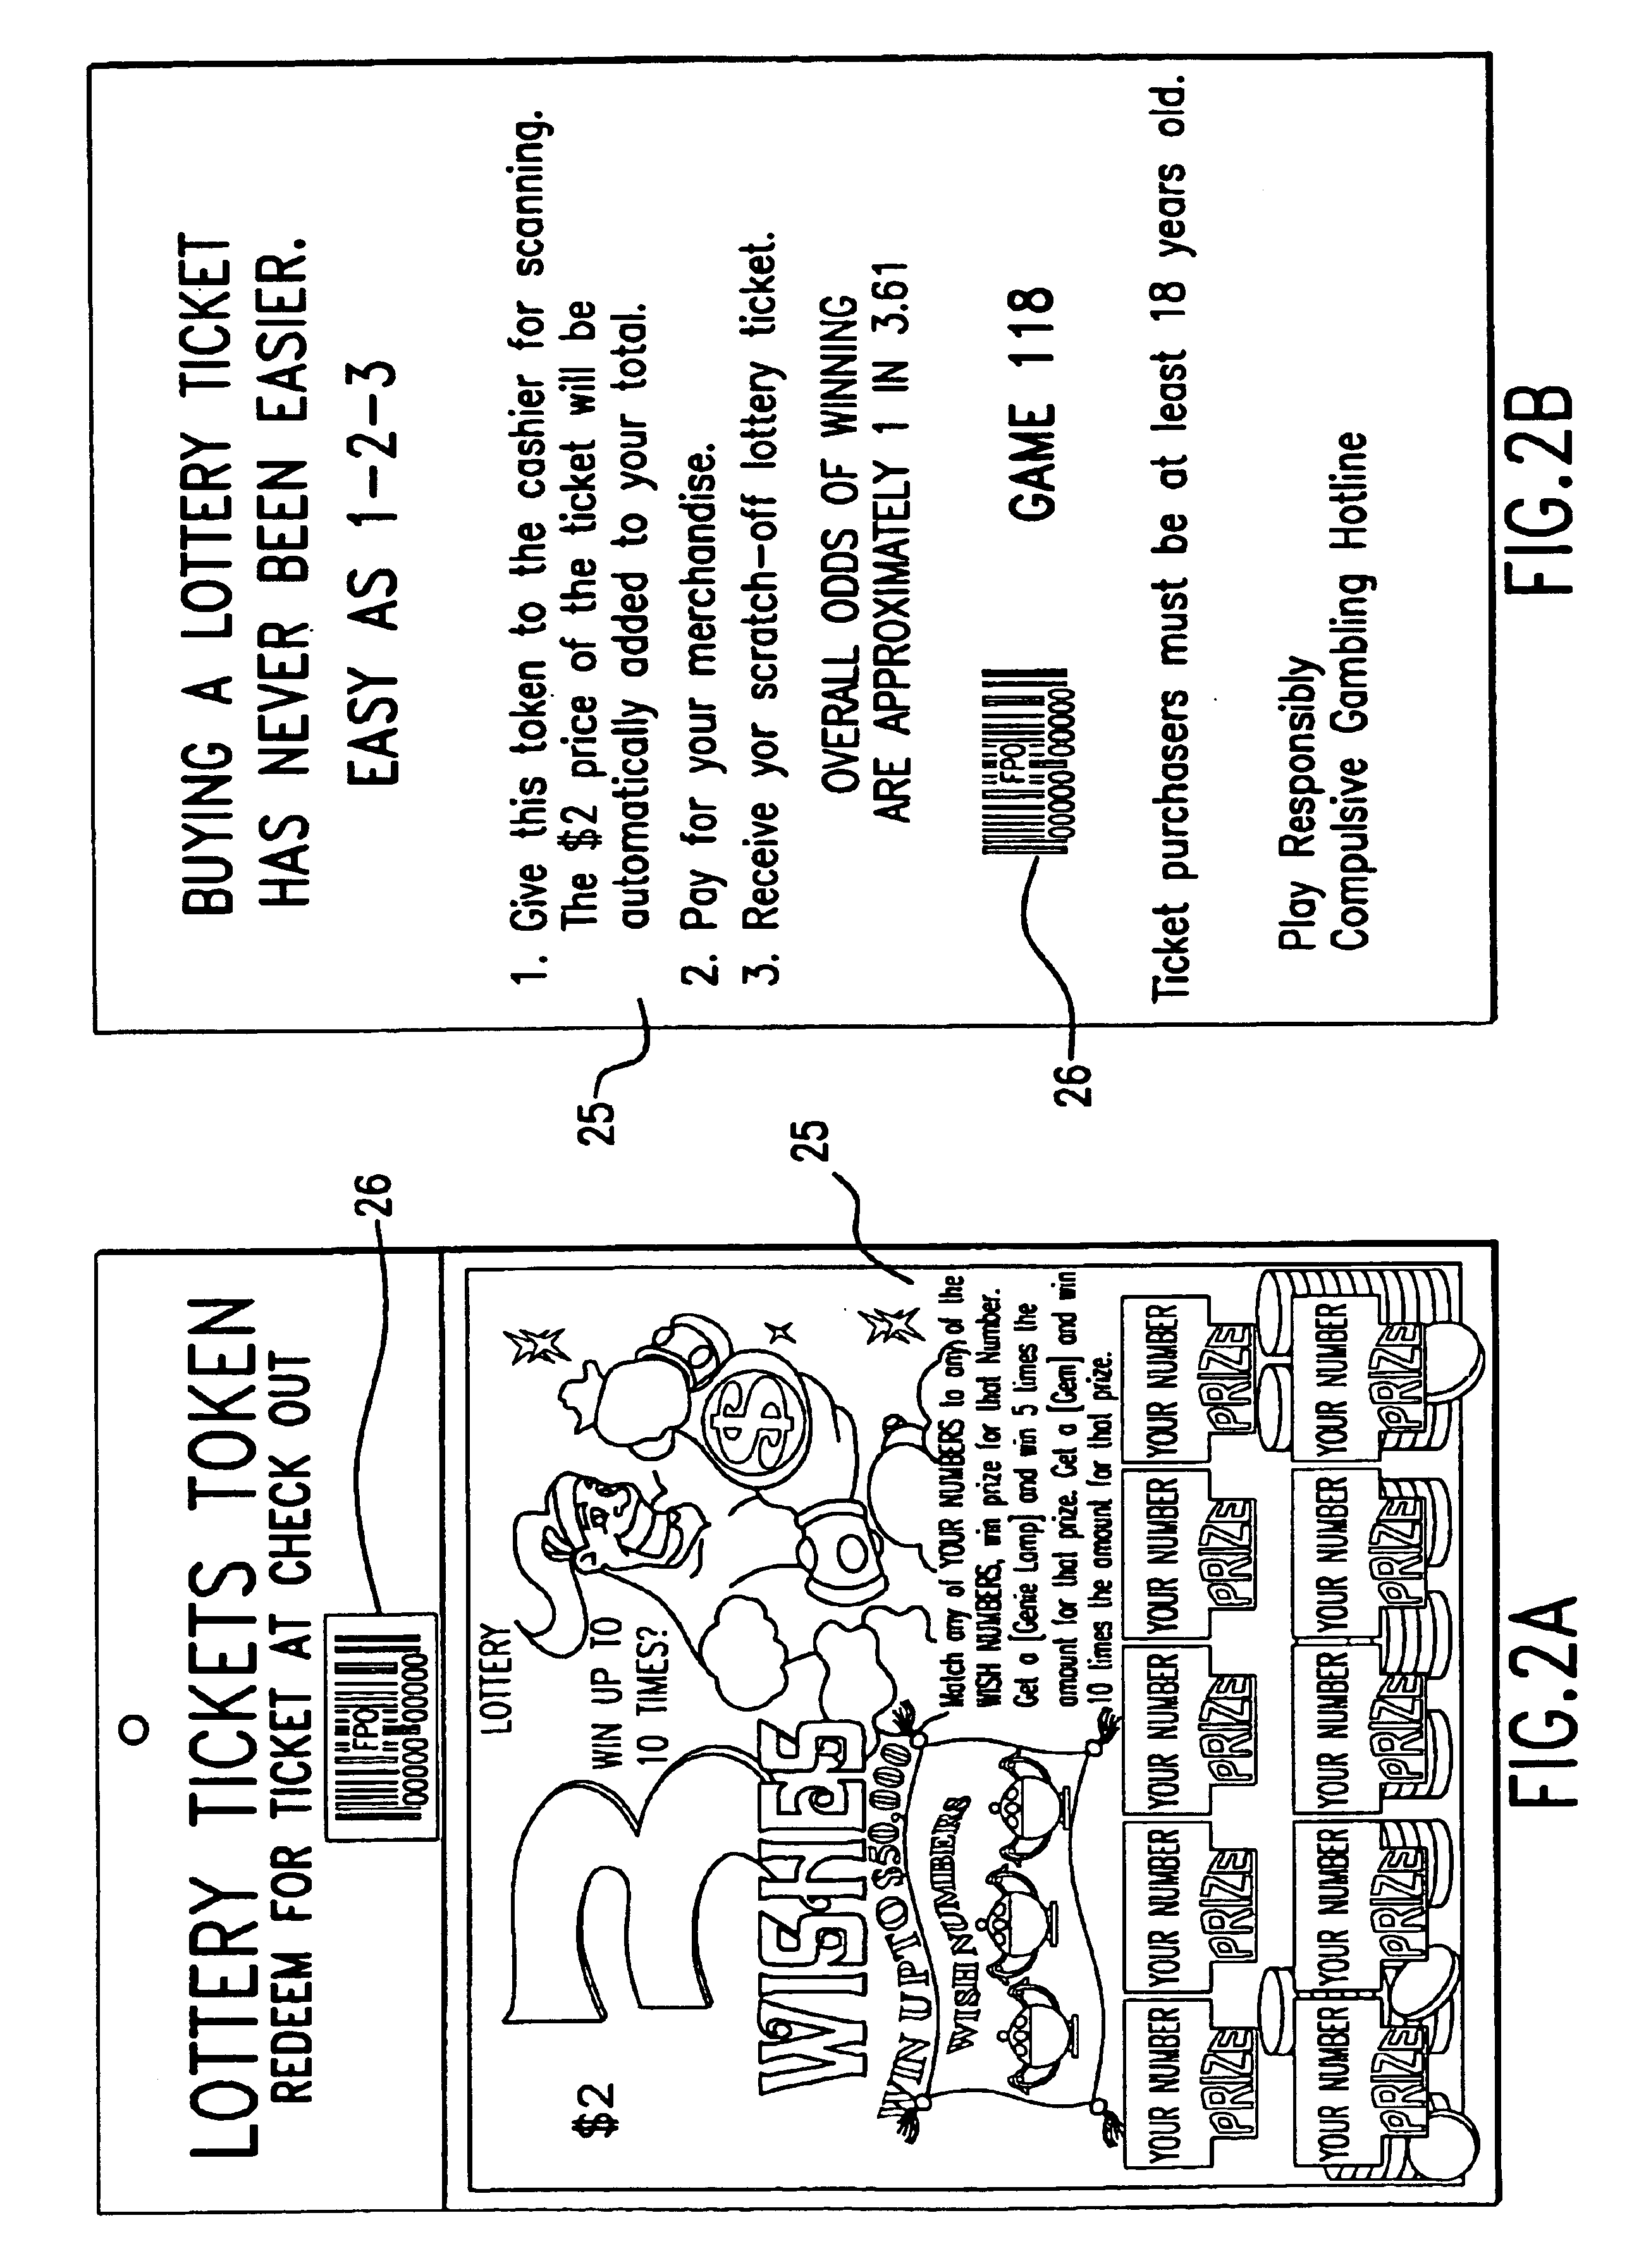 System and method for selling lottery game tickets